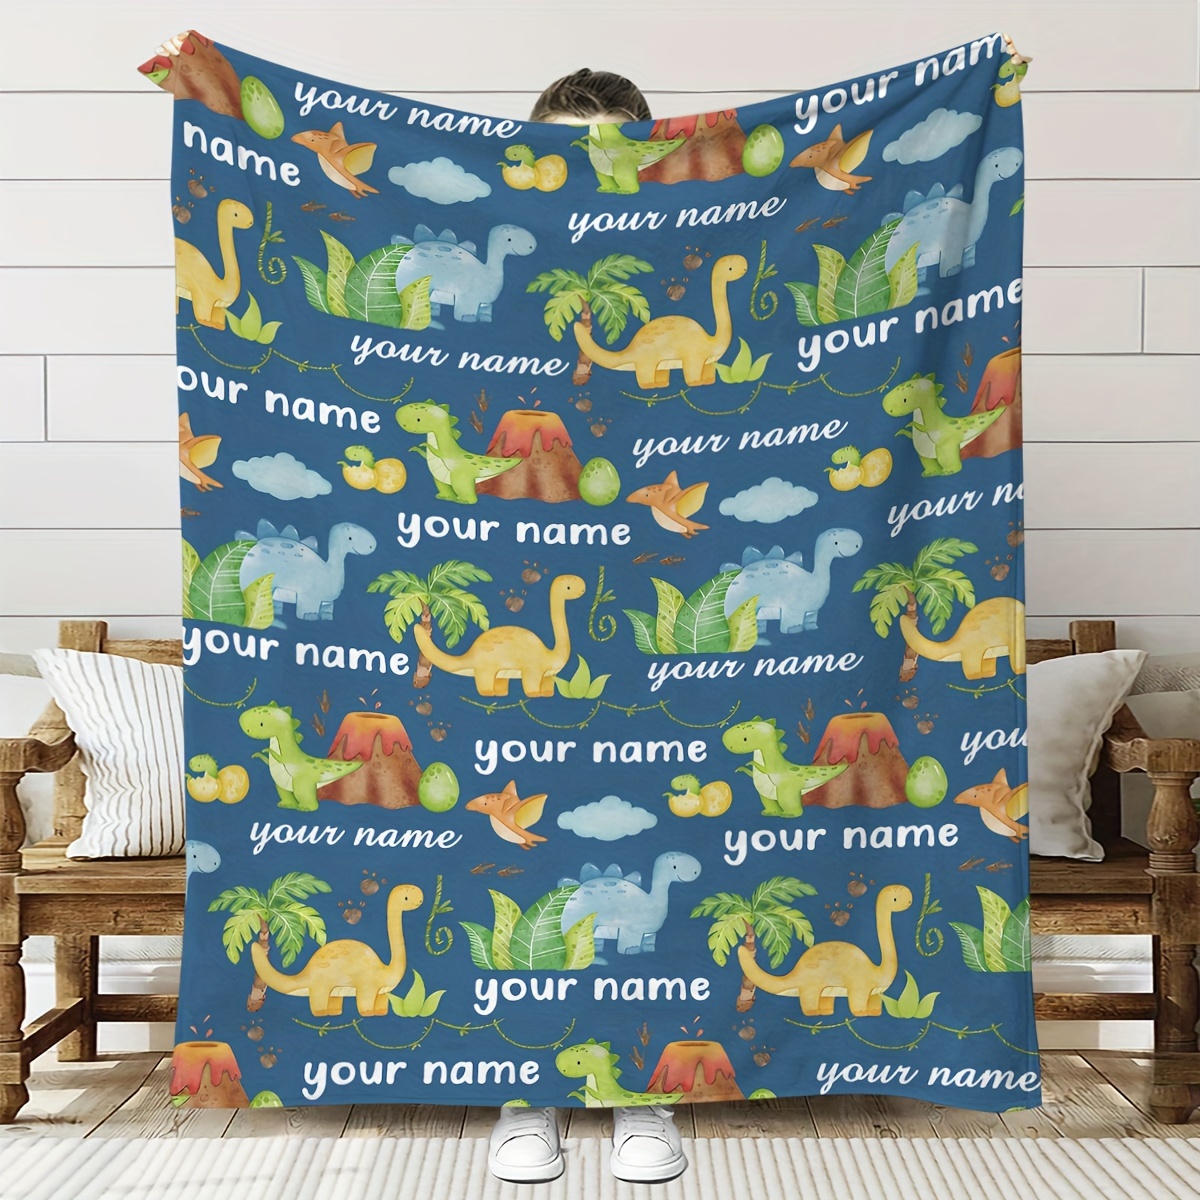 

Customizable Cartoon Dinosaur Print Blanket - Soft Warm Flannel Throw For All Seasons, Personalized Name Feature, Digital Printing, 100% Polyester Filling, Contemporary Style - Ideal Gift